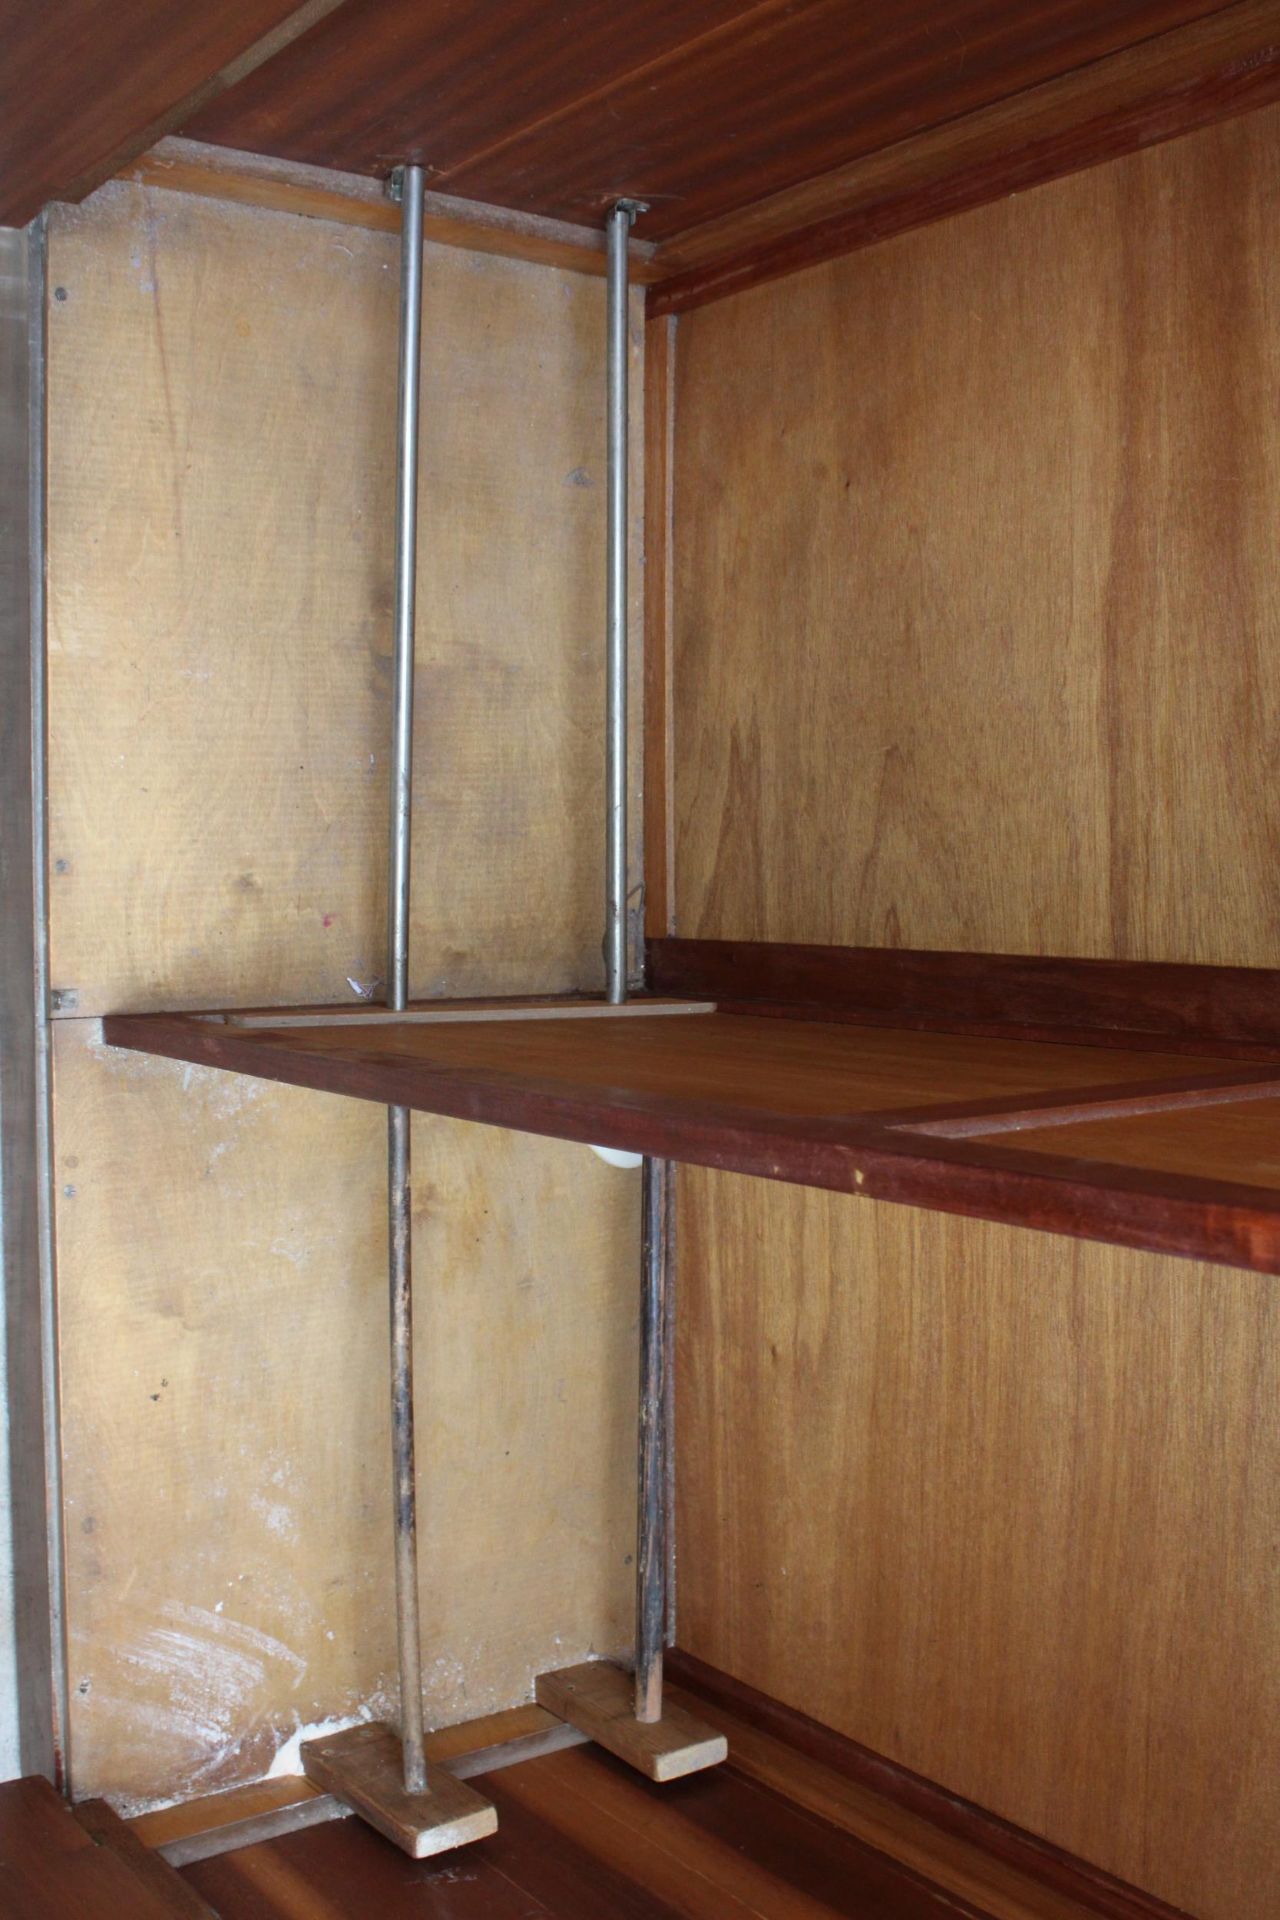 A MID 20TH CENTURY D.B.S. FURNITURE WALNUT TWO DOOR WARDROBE, DRESSING TABLE, 4'6" BEDHEAD AND FOOT, - Image 5 of 7